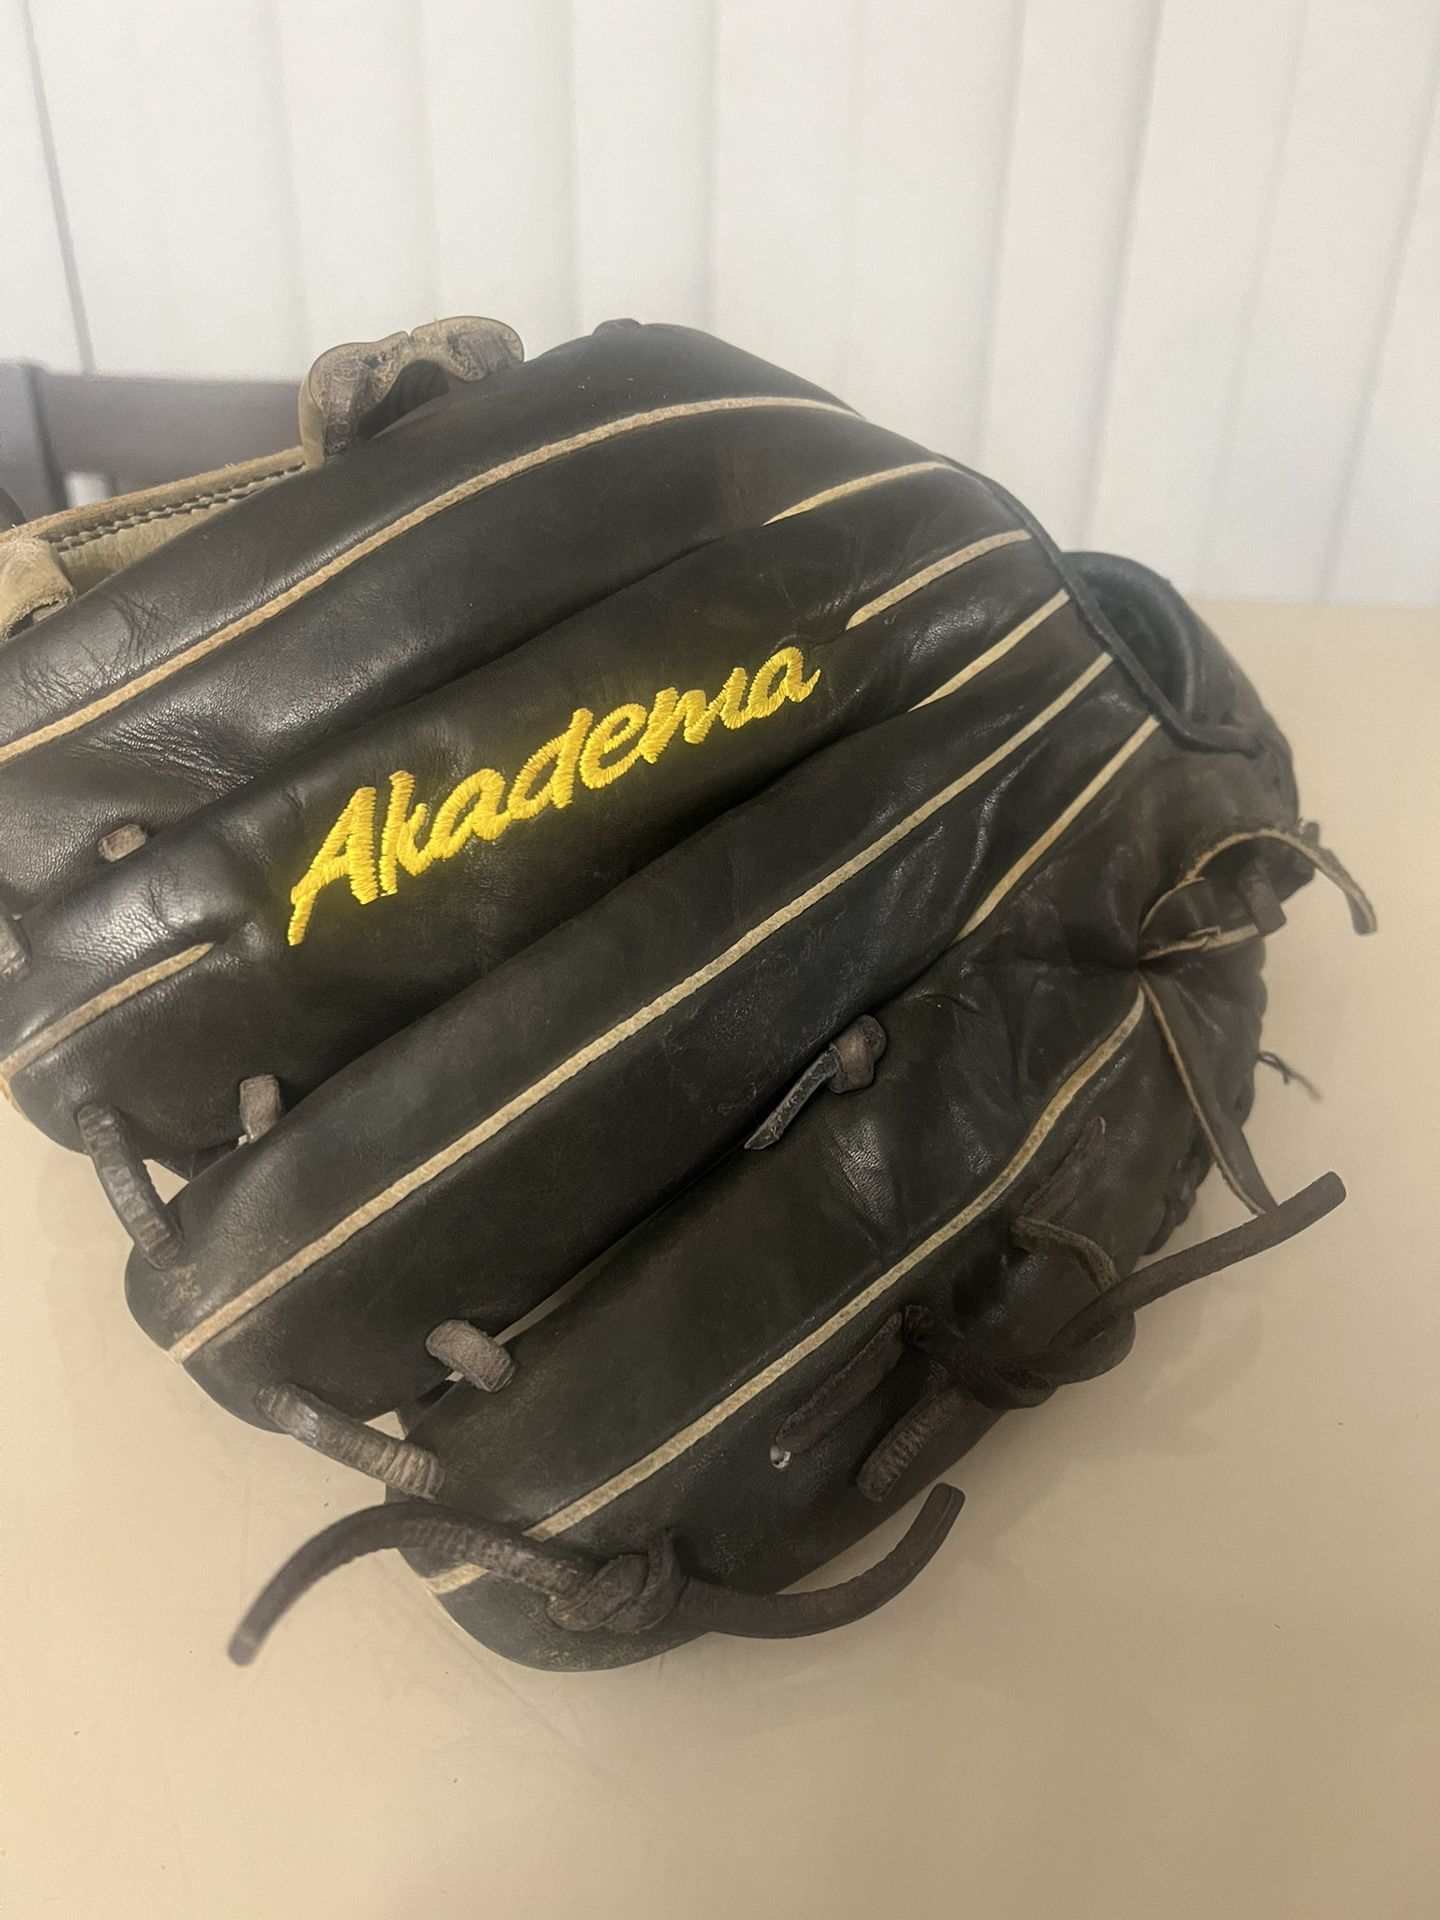 Akadema Professional Series AEG3 11.75"(11 3/4) Baseball Glove RHT in good cosmetic condition however it’s missing s string at the top of the risk to 